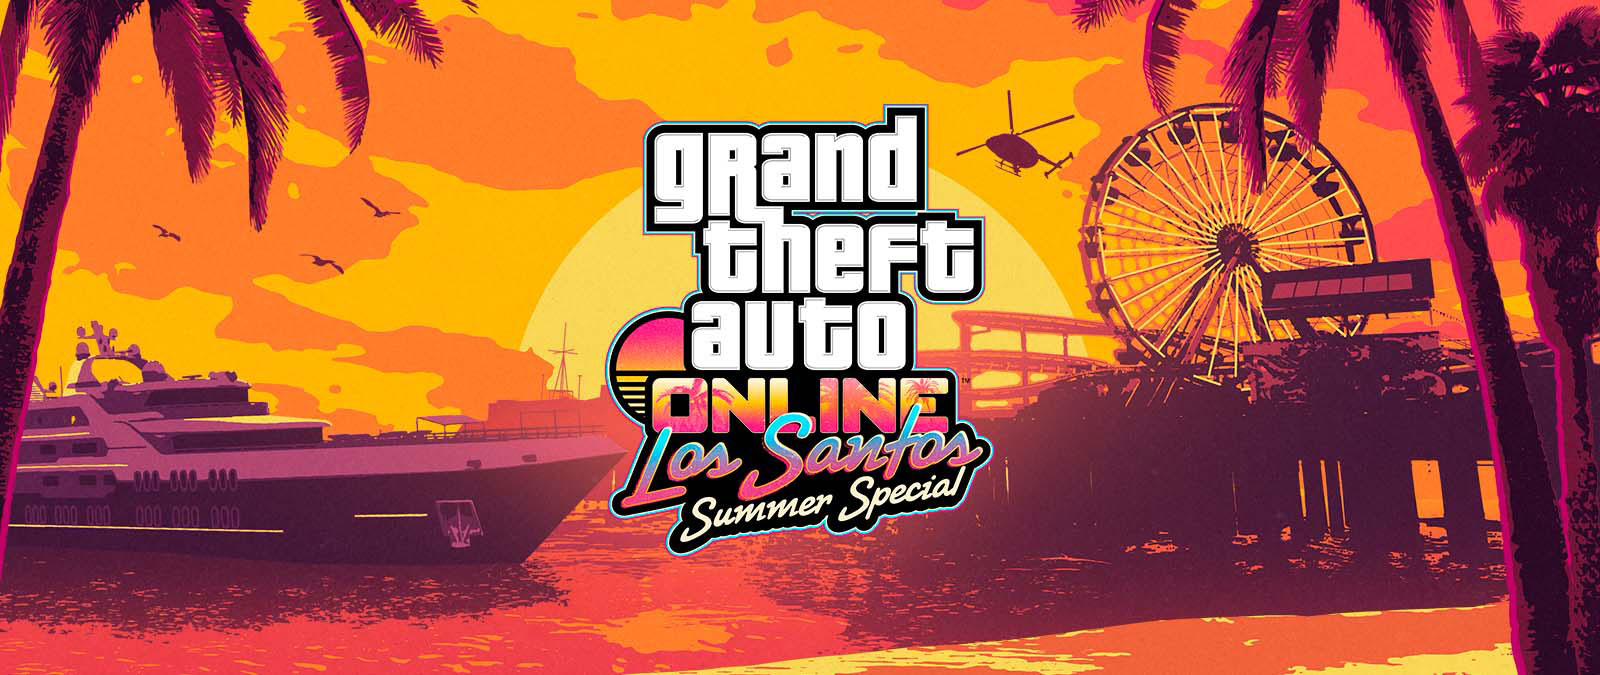 Grand Theft Auto Online. Los Santos Summer Special. A yacht, Ferris wheel, and a helicopter at sunset